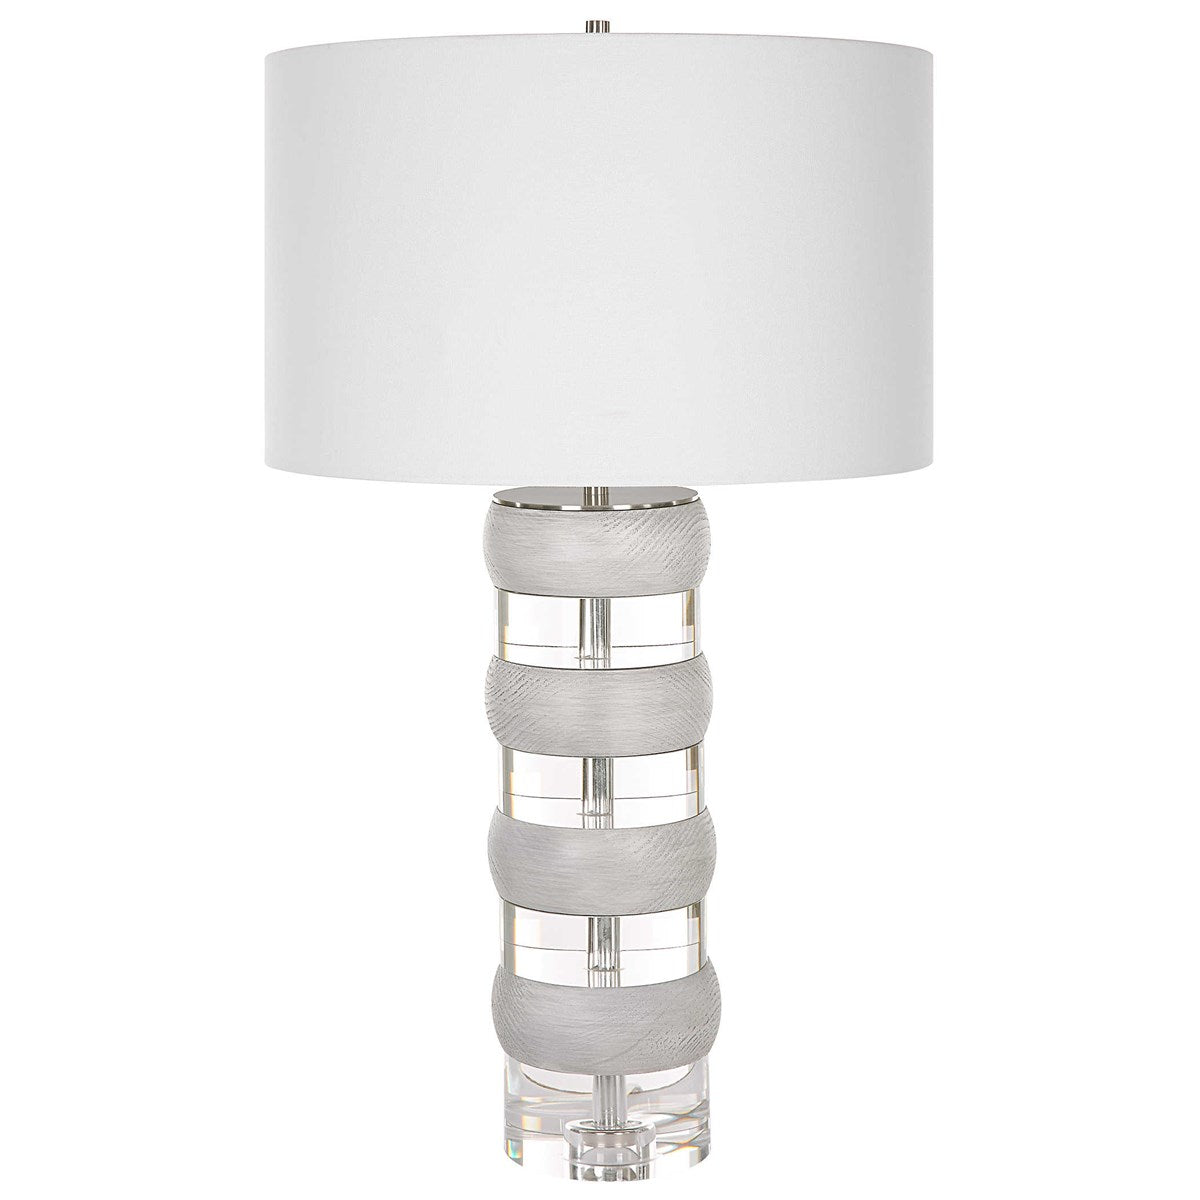 Band Together Table Lamp